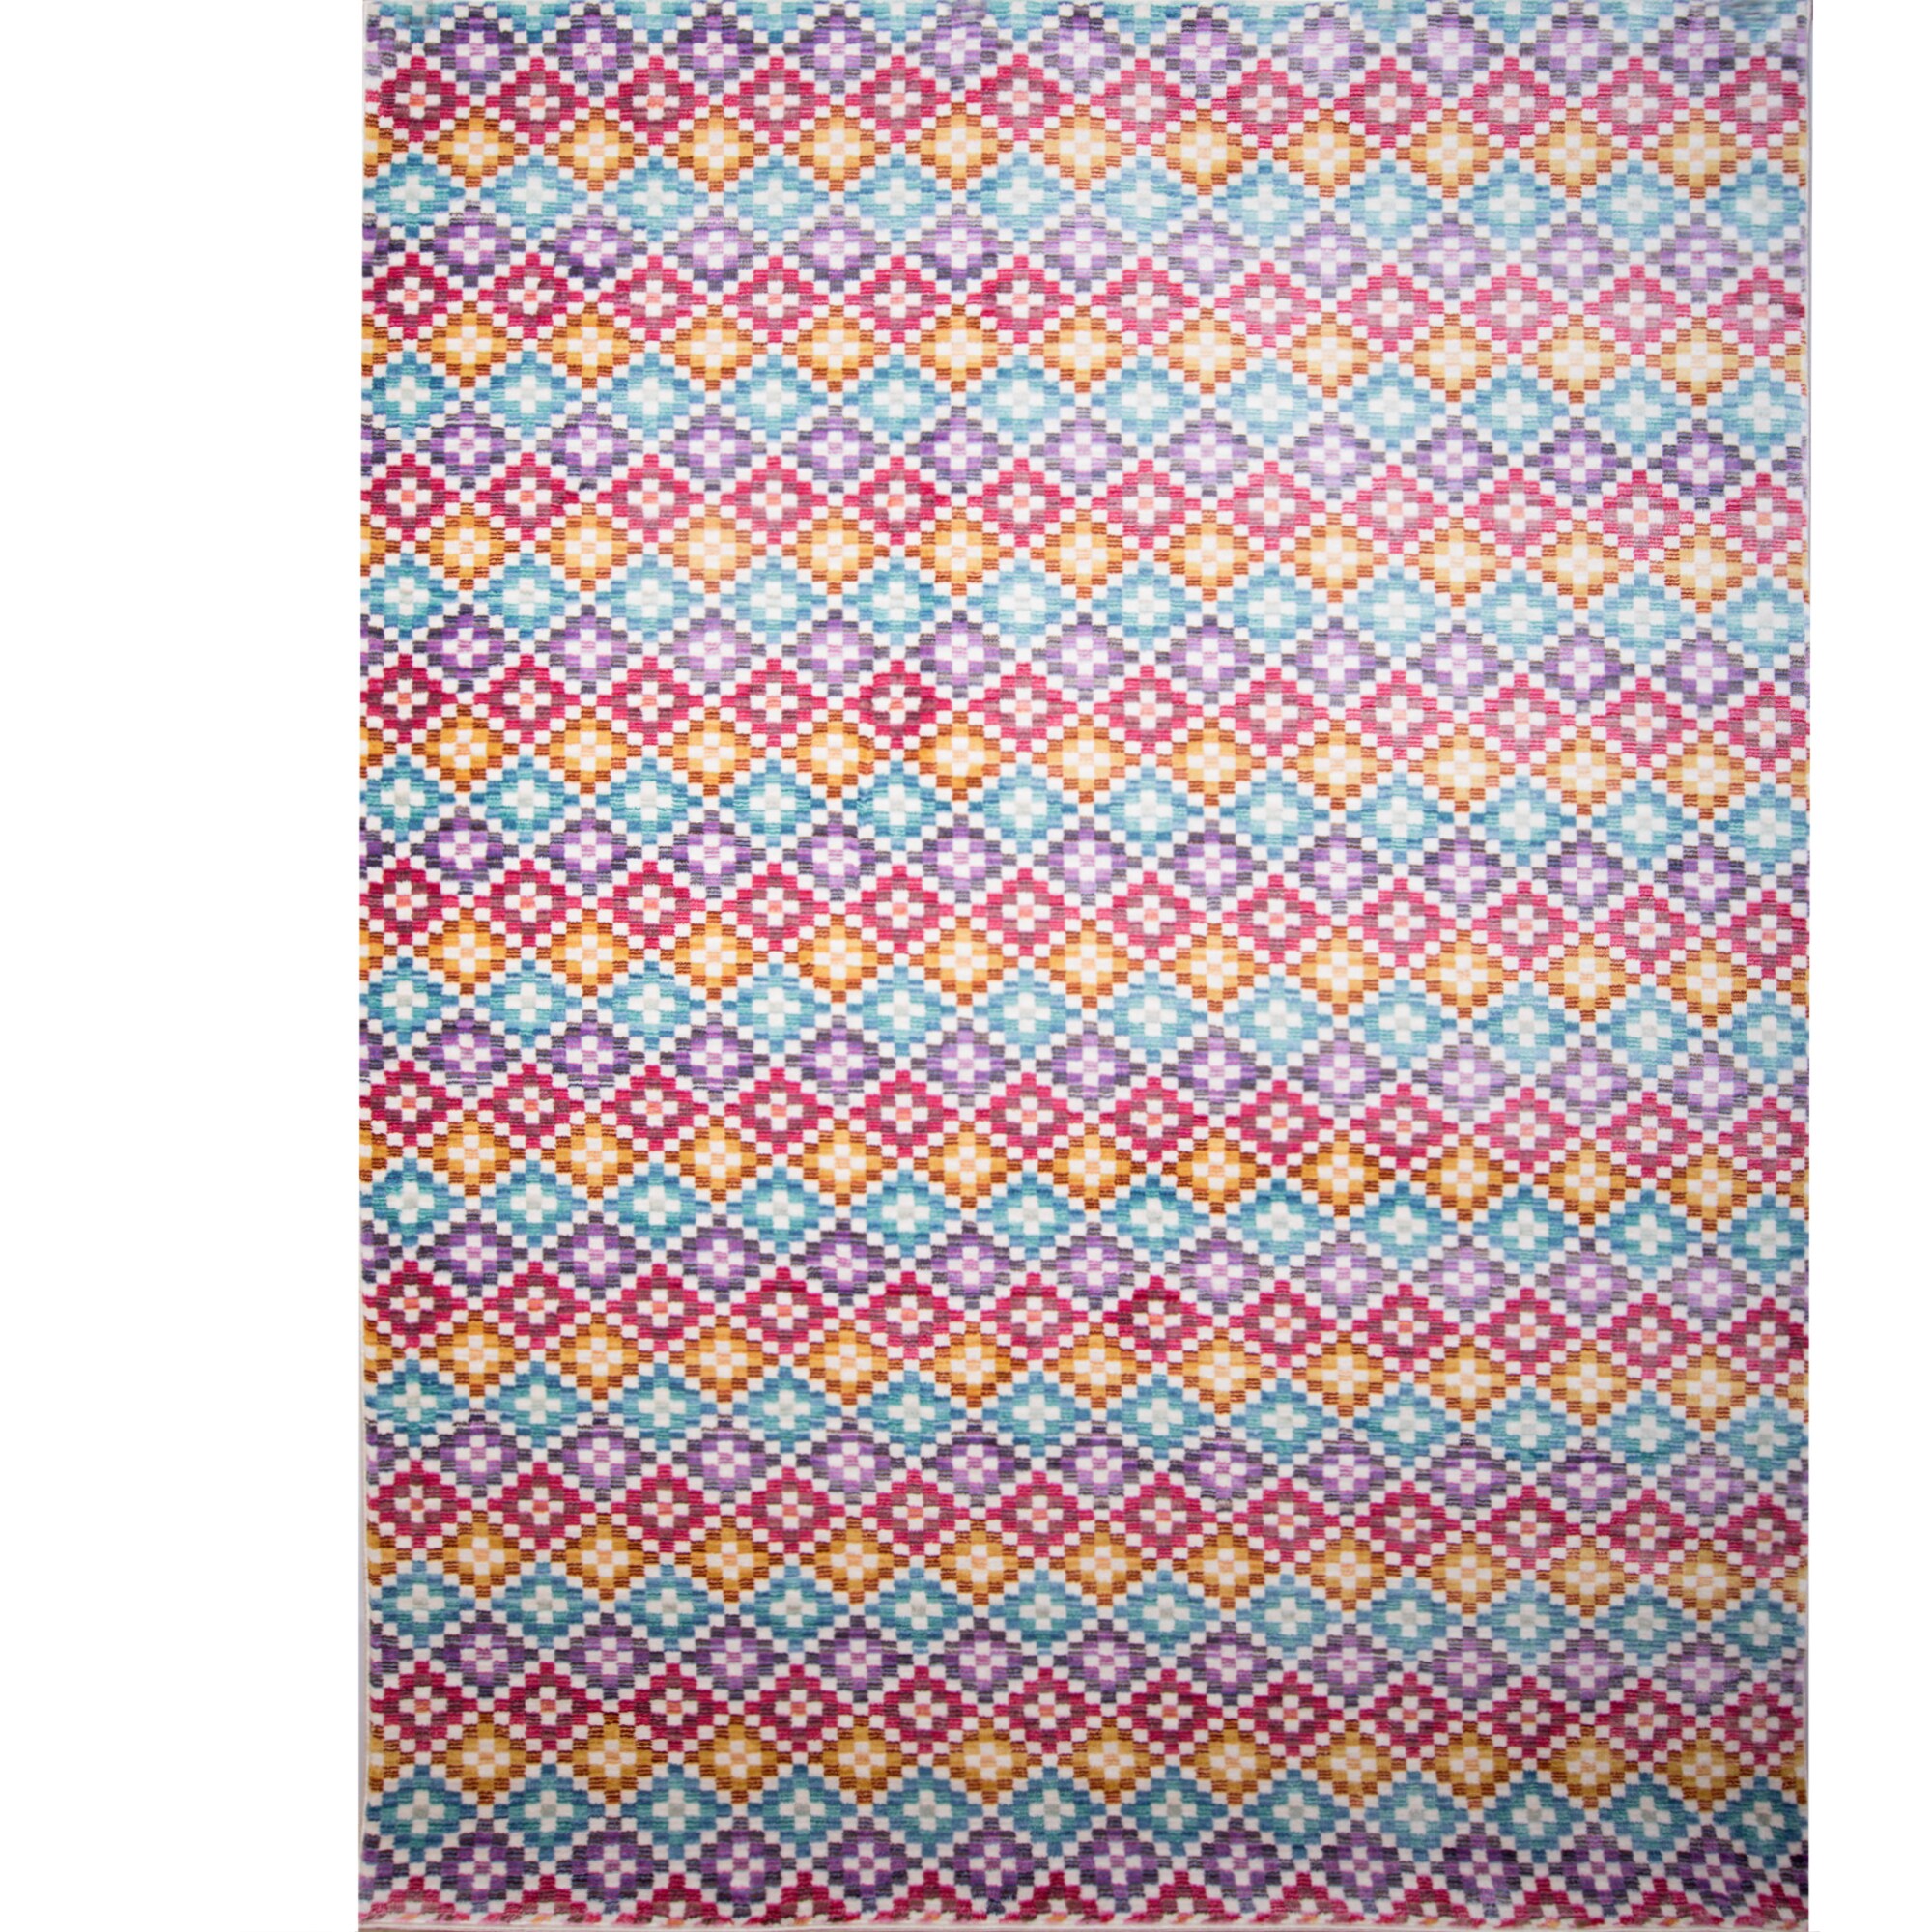 https://ak1.ostkcdn.com/images/products/15315599/Rainbow-Rugs-by-Home-Dynamix-Marquee-Collection-bb18cbc3-e3fb-4868-a62d-c1c851a19853.jpg